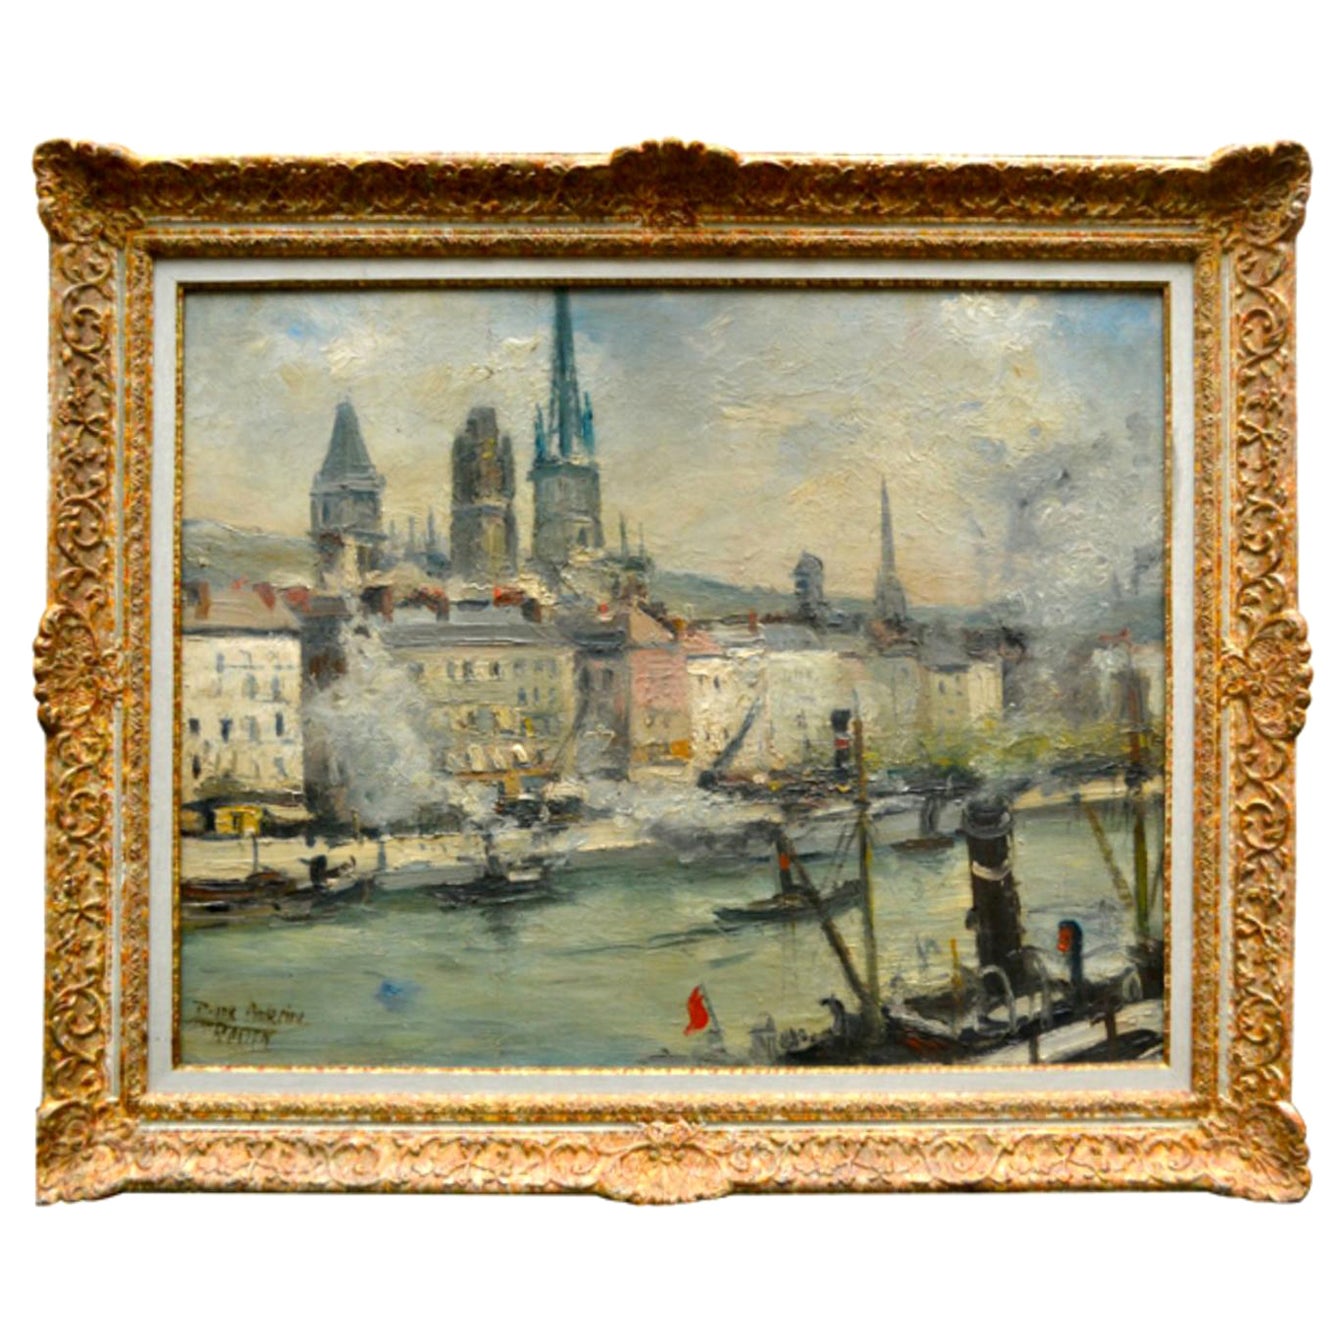 An impressionist oil on canvas showing day to day Industrial and merchant shipping activity on the Seine at the town of Rouen France right on the cusp of the break out of World War II 1939, The canvas is by Roger Bertin. It is signed and dated on